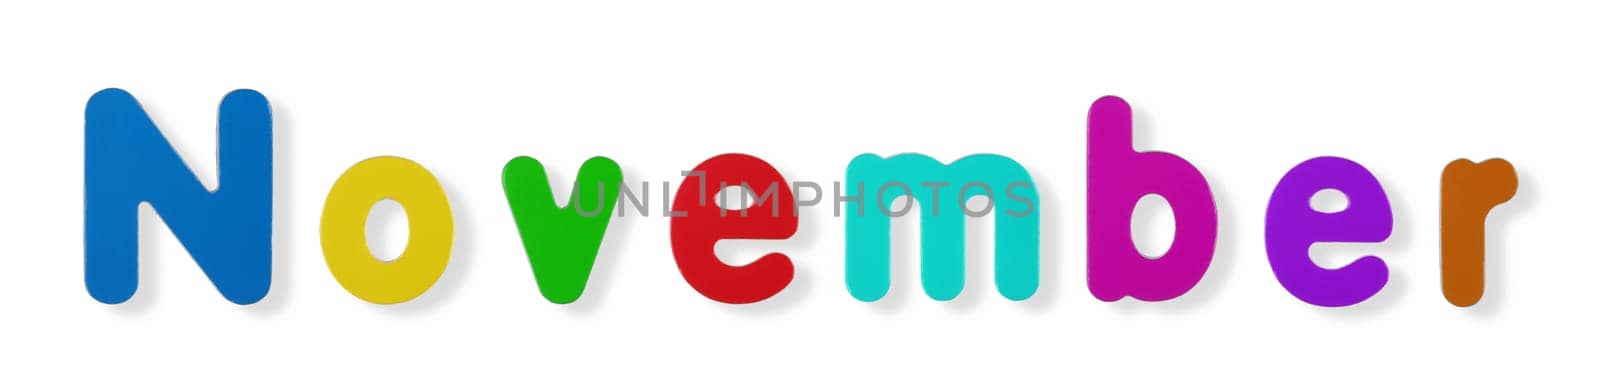 A November word in coloured magnetic letters on white with clipping path to remove shadow